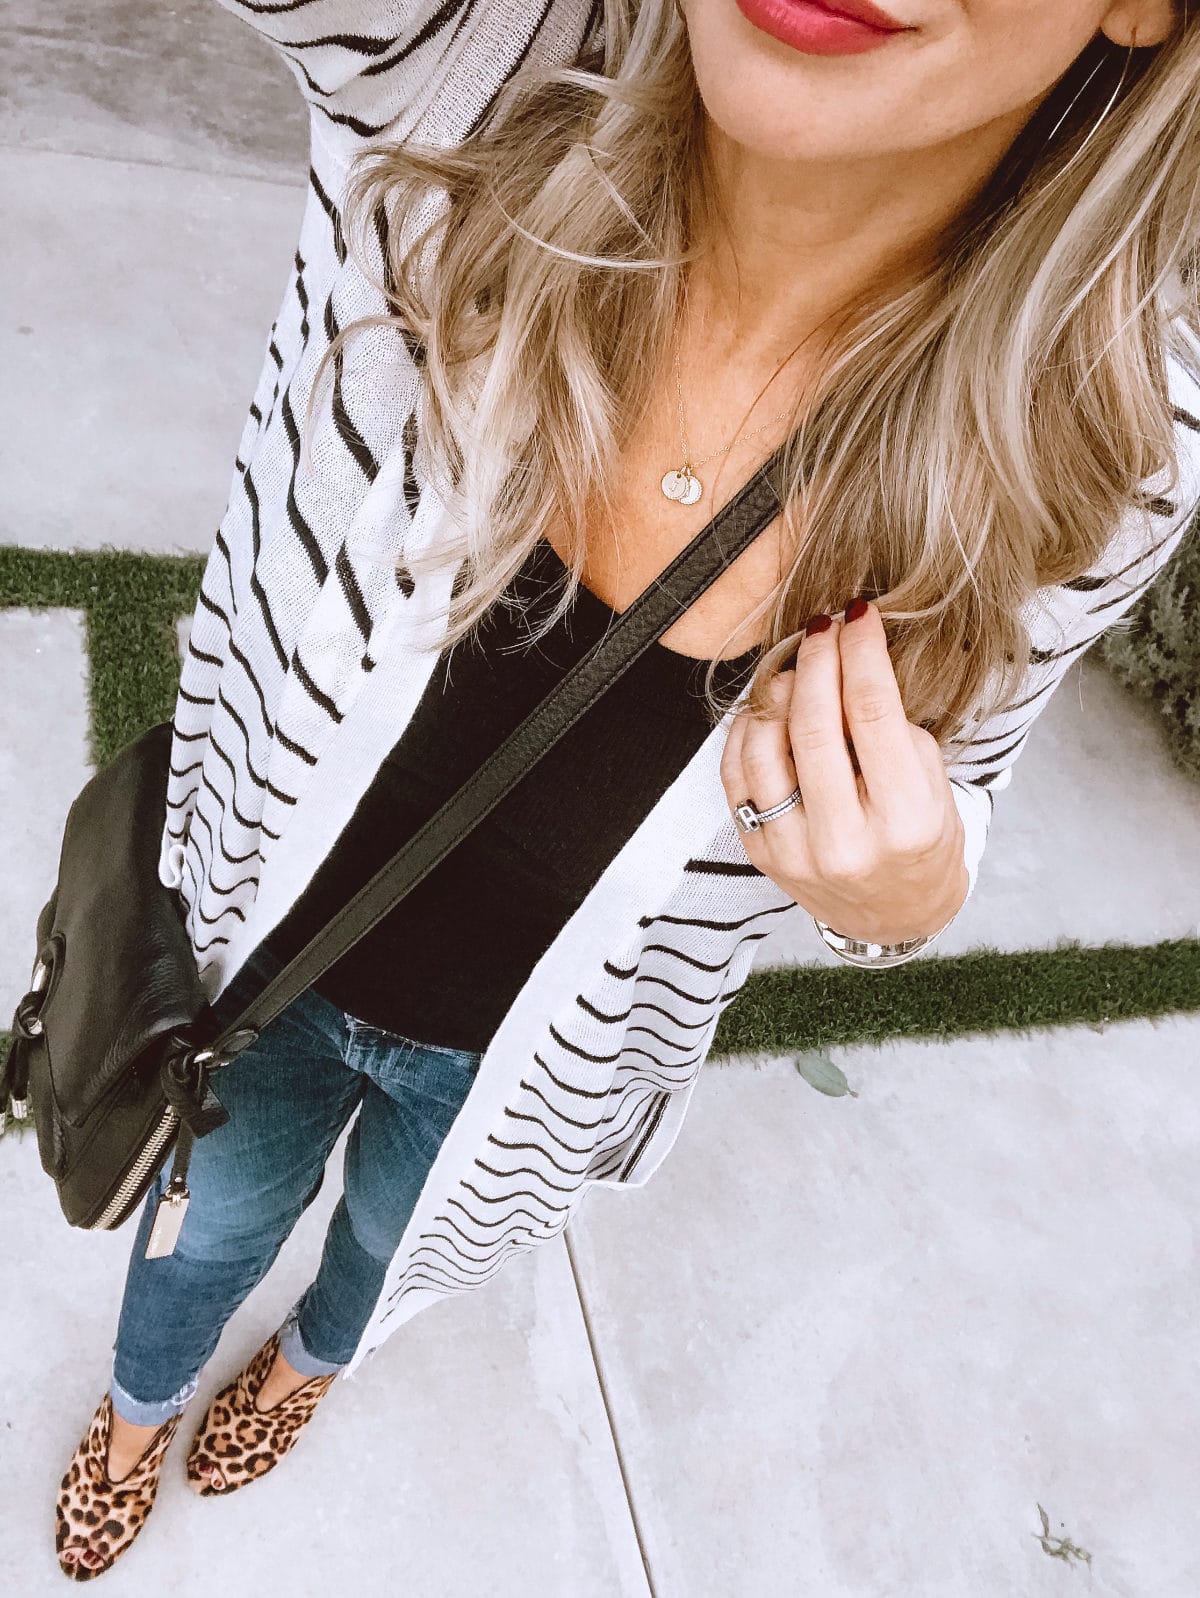 Long striped cardigan and skinny jeans with leopard booties